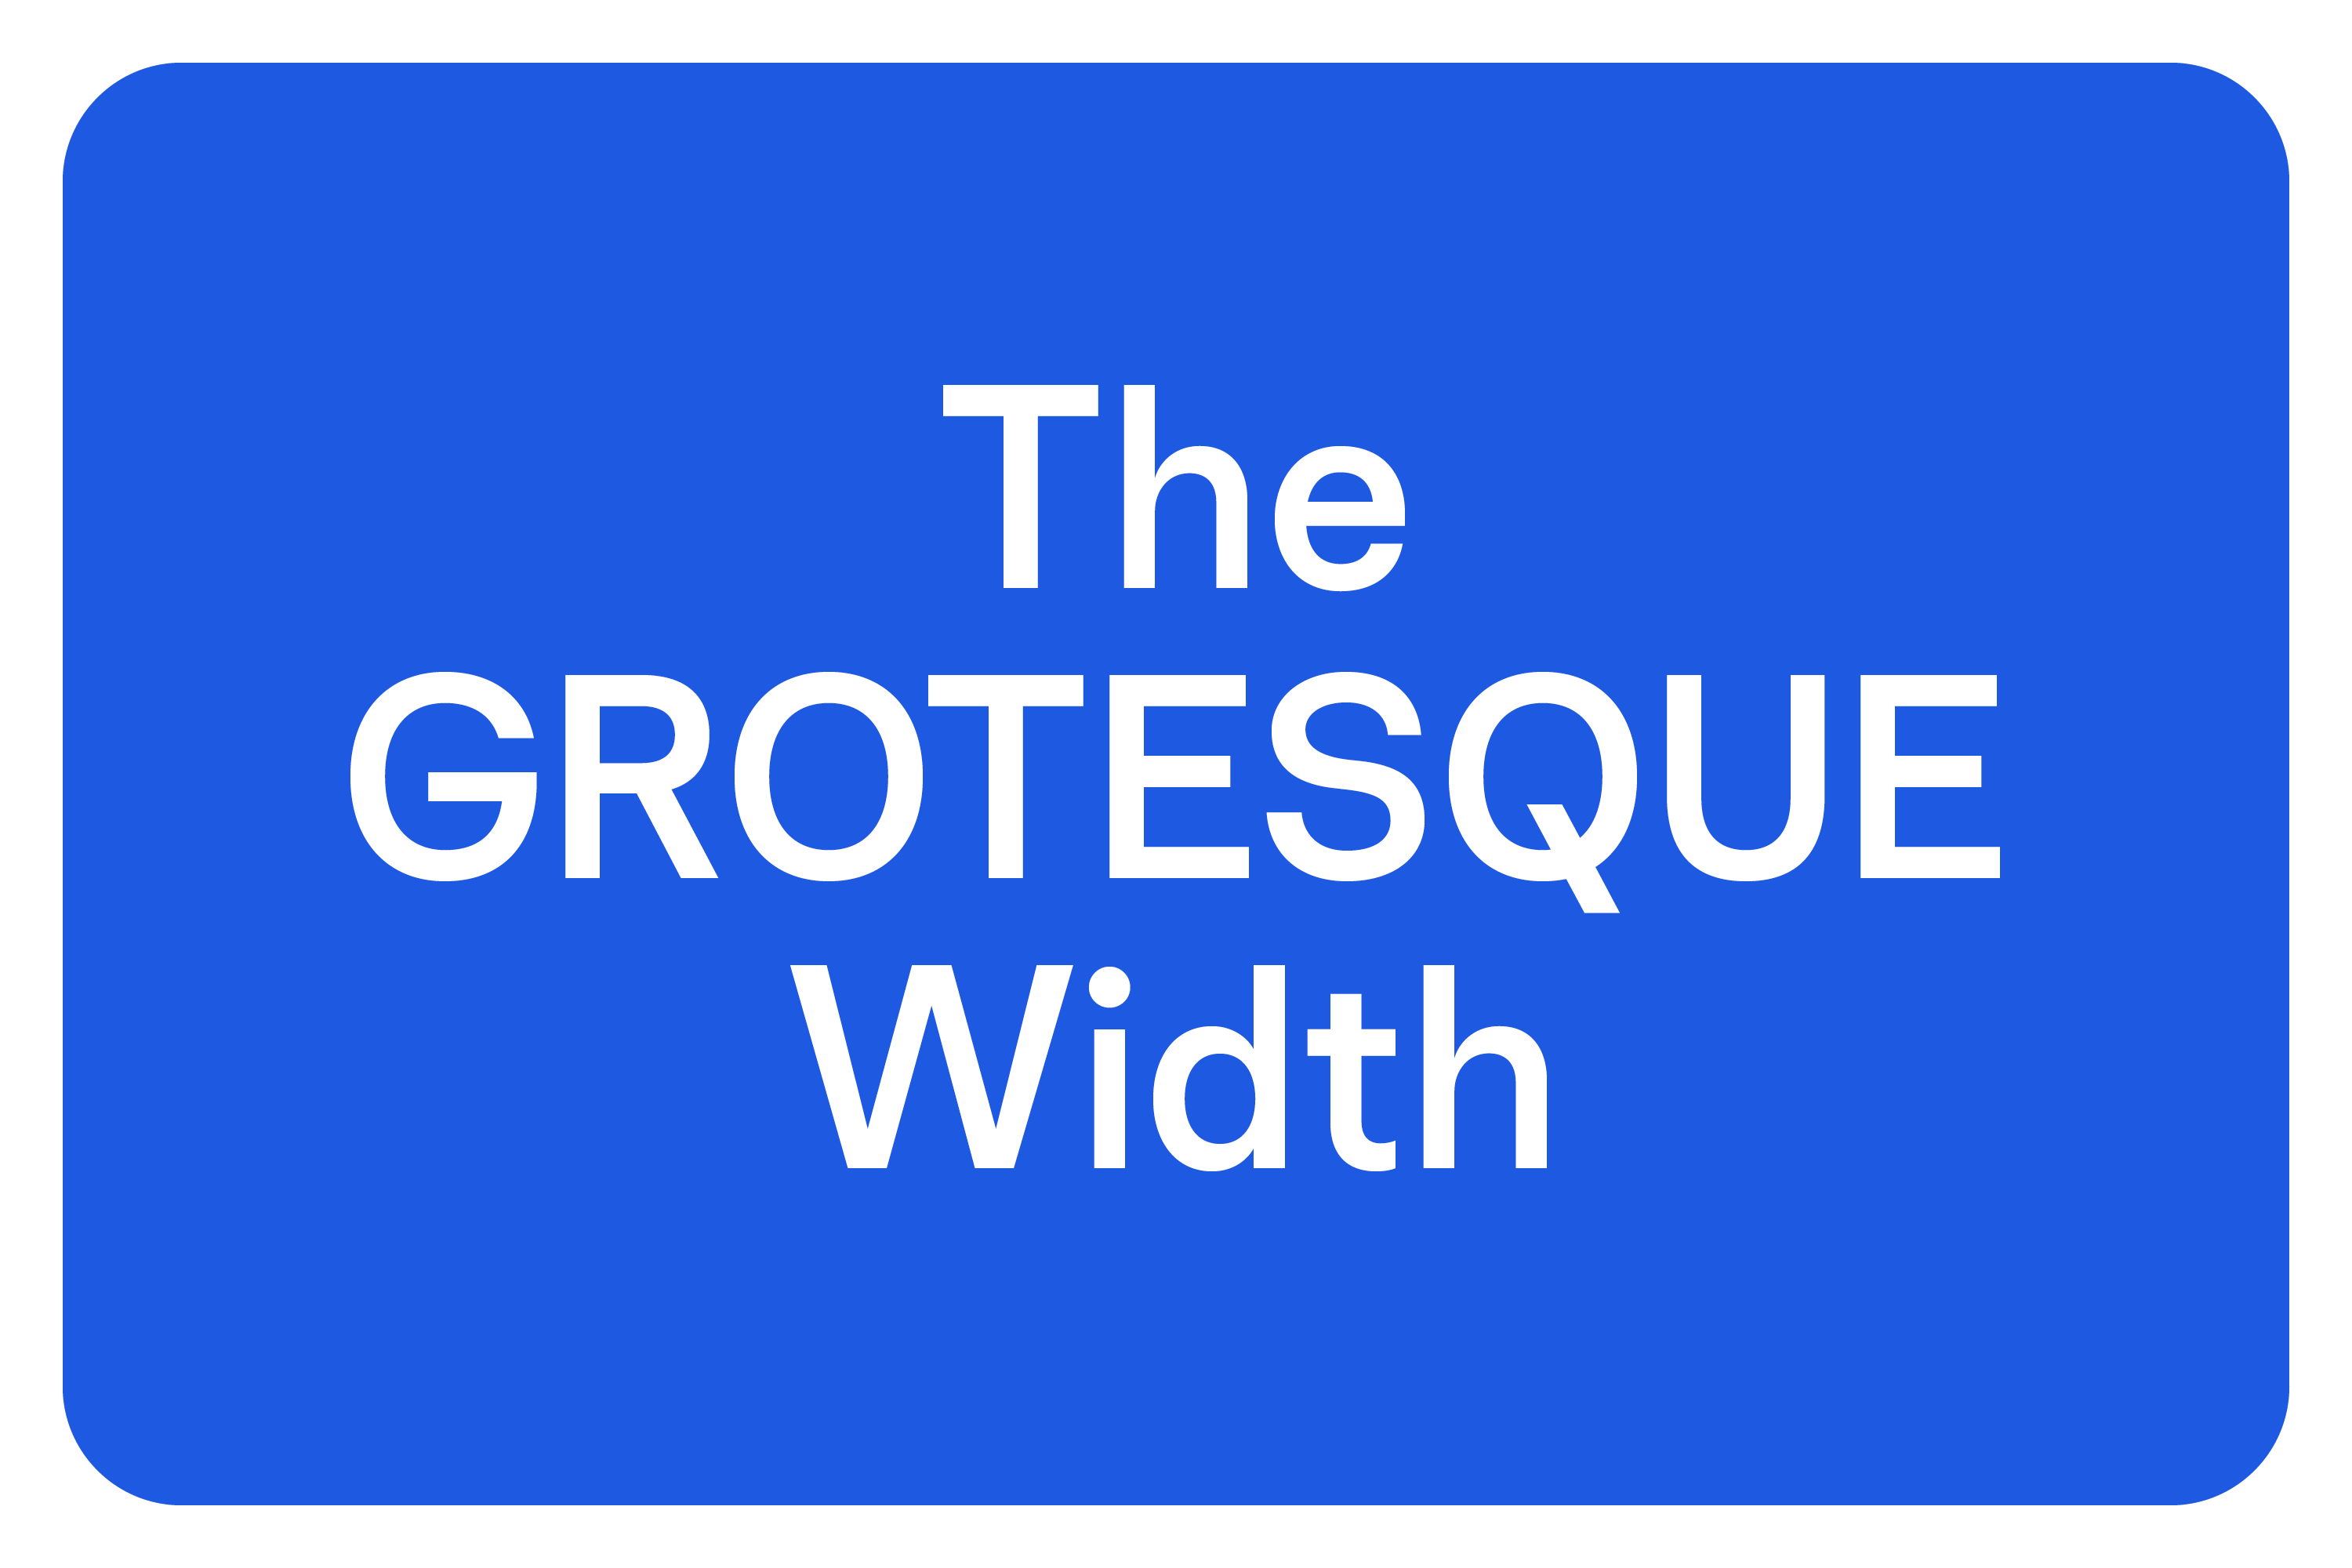 The GROTESQUE Width